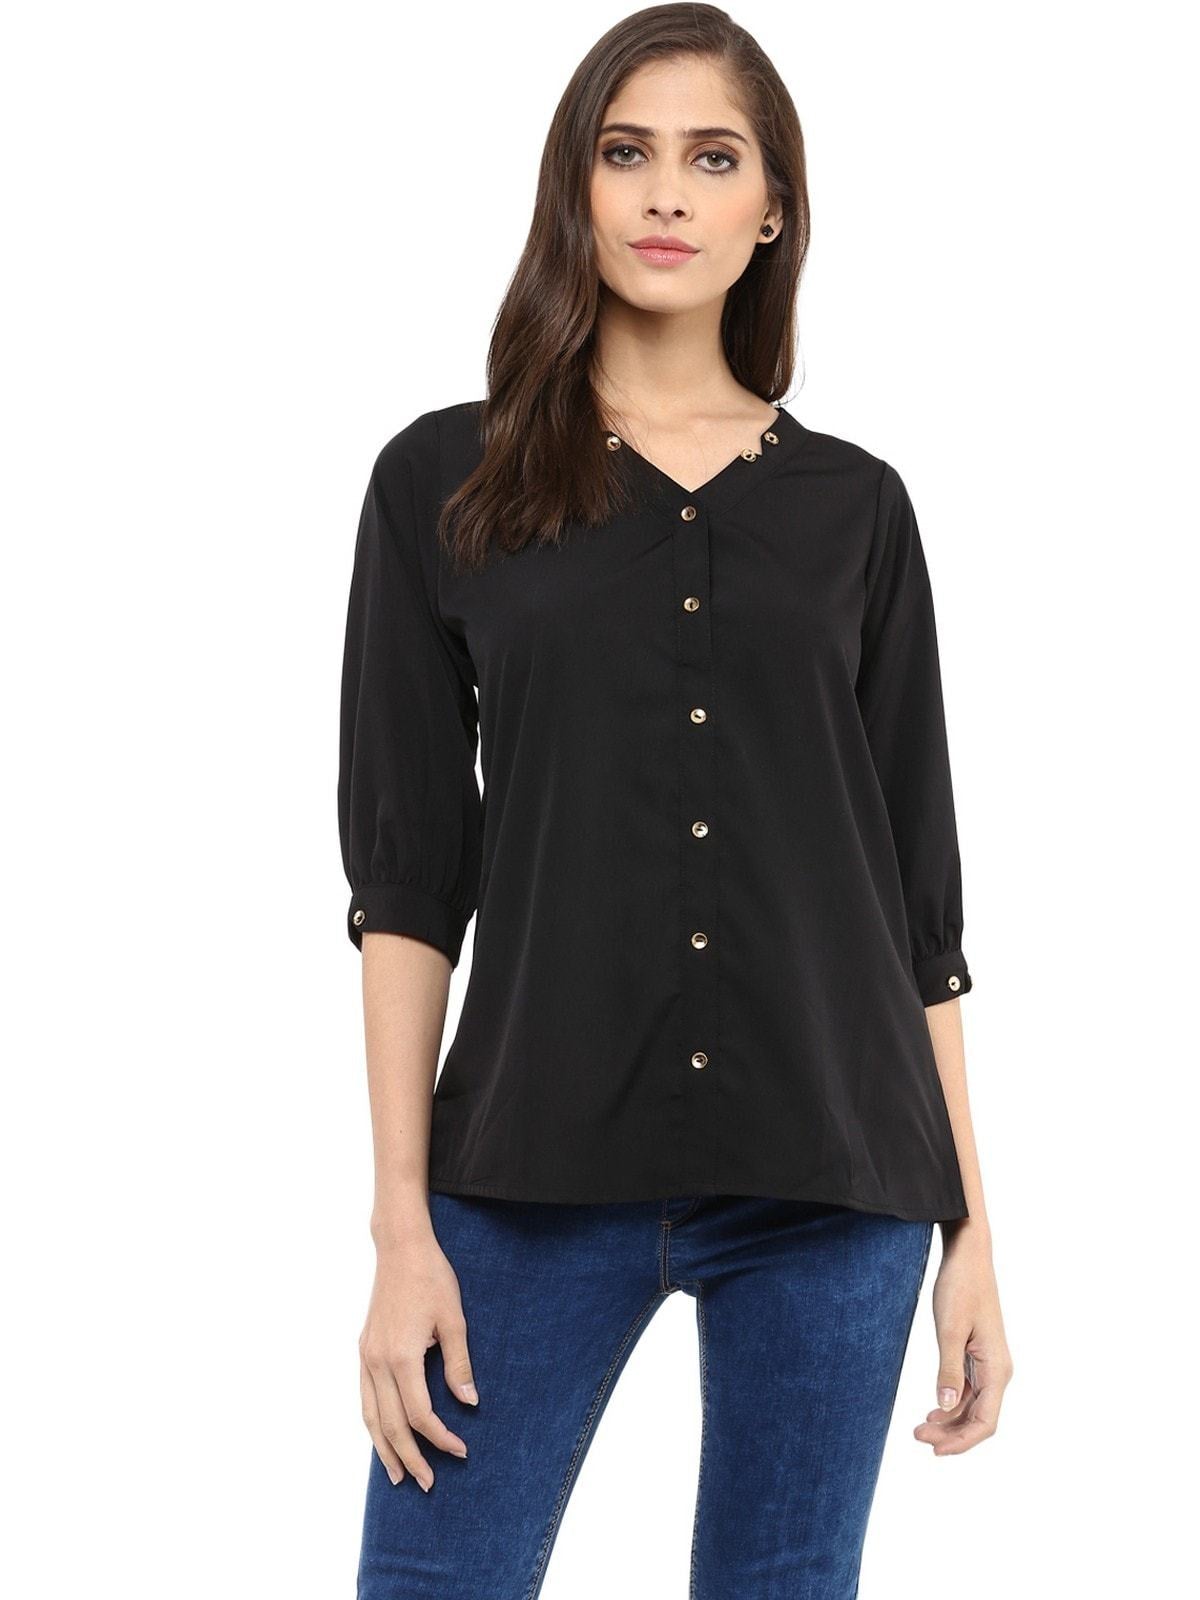 Women's Black  Shirt Top With Detailed Notch Designs - Pannkh